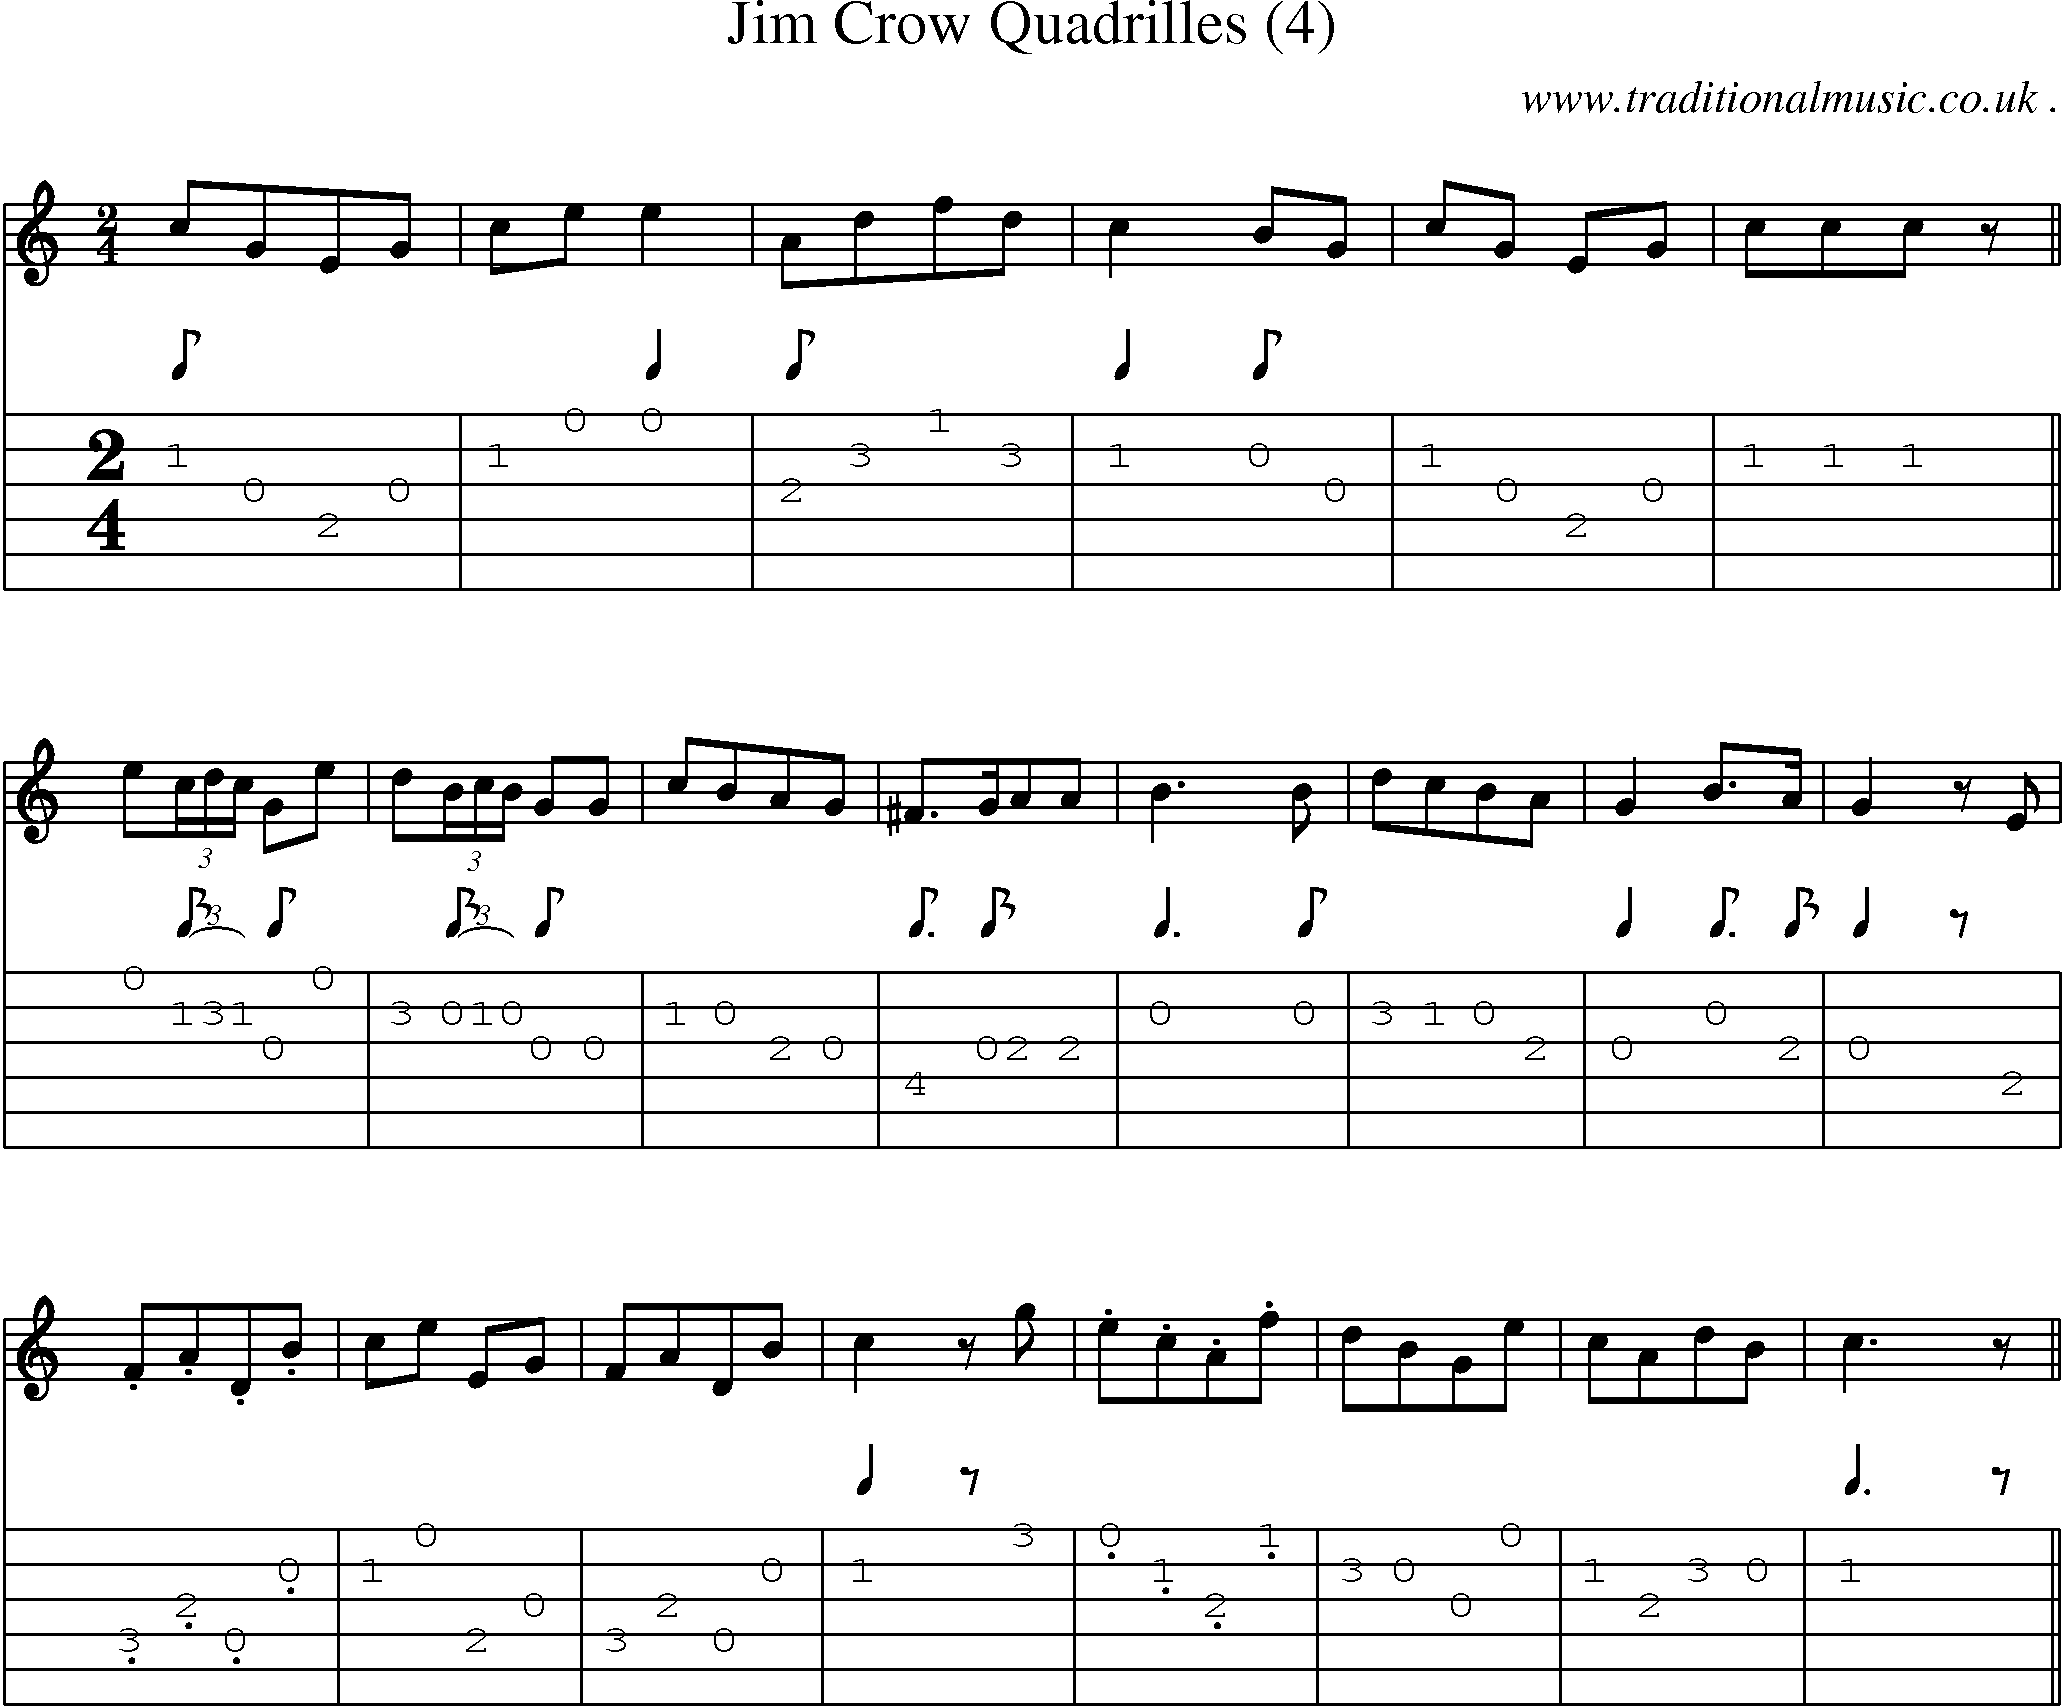 Sheet-Music and Guitar Tabs for Jim Crow Quadrilles (4)